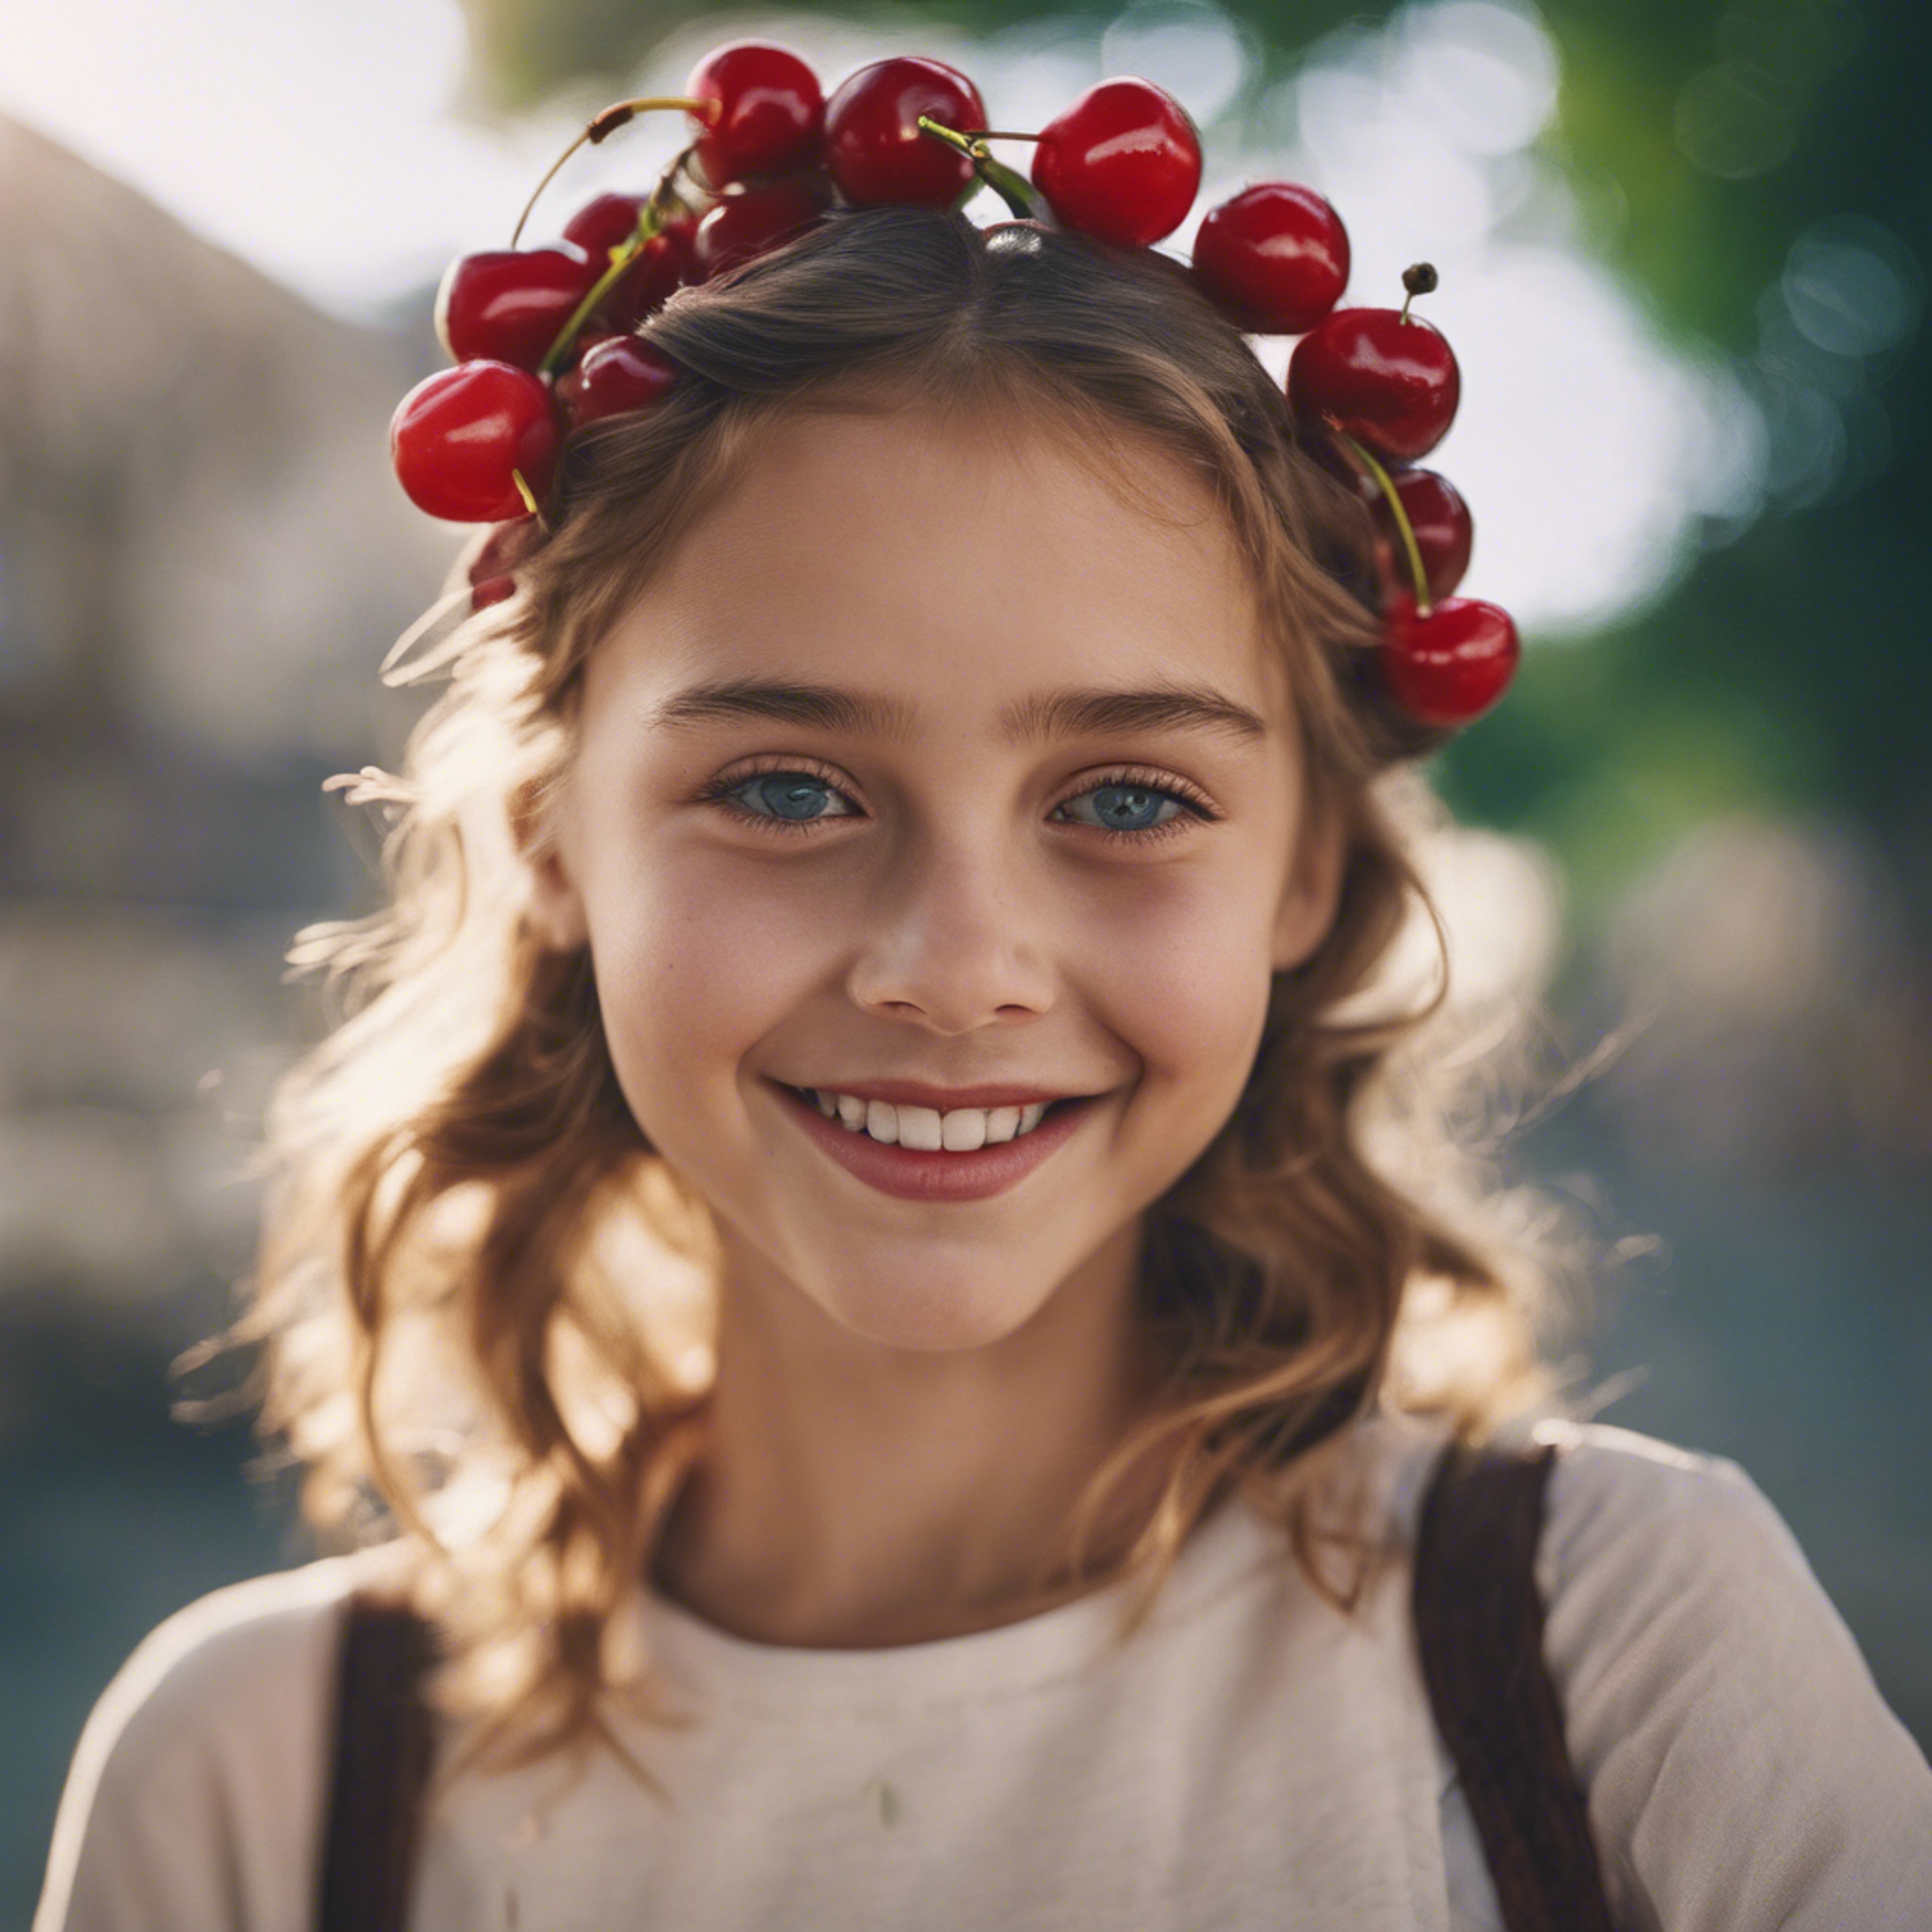 A girl with a cherry barrette in her hair, smiling at the viewer. วอลล์เปเปอร์[3ffde2b89a9346a6b02b]